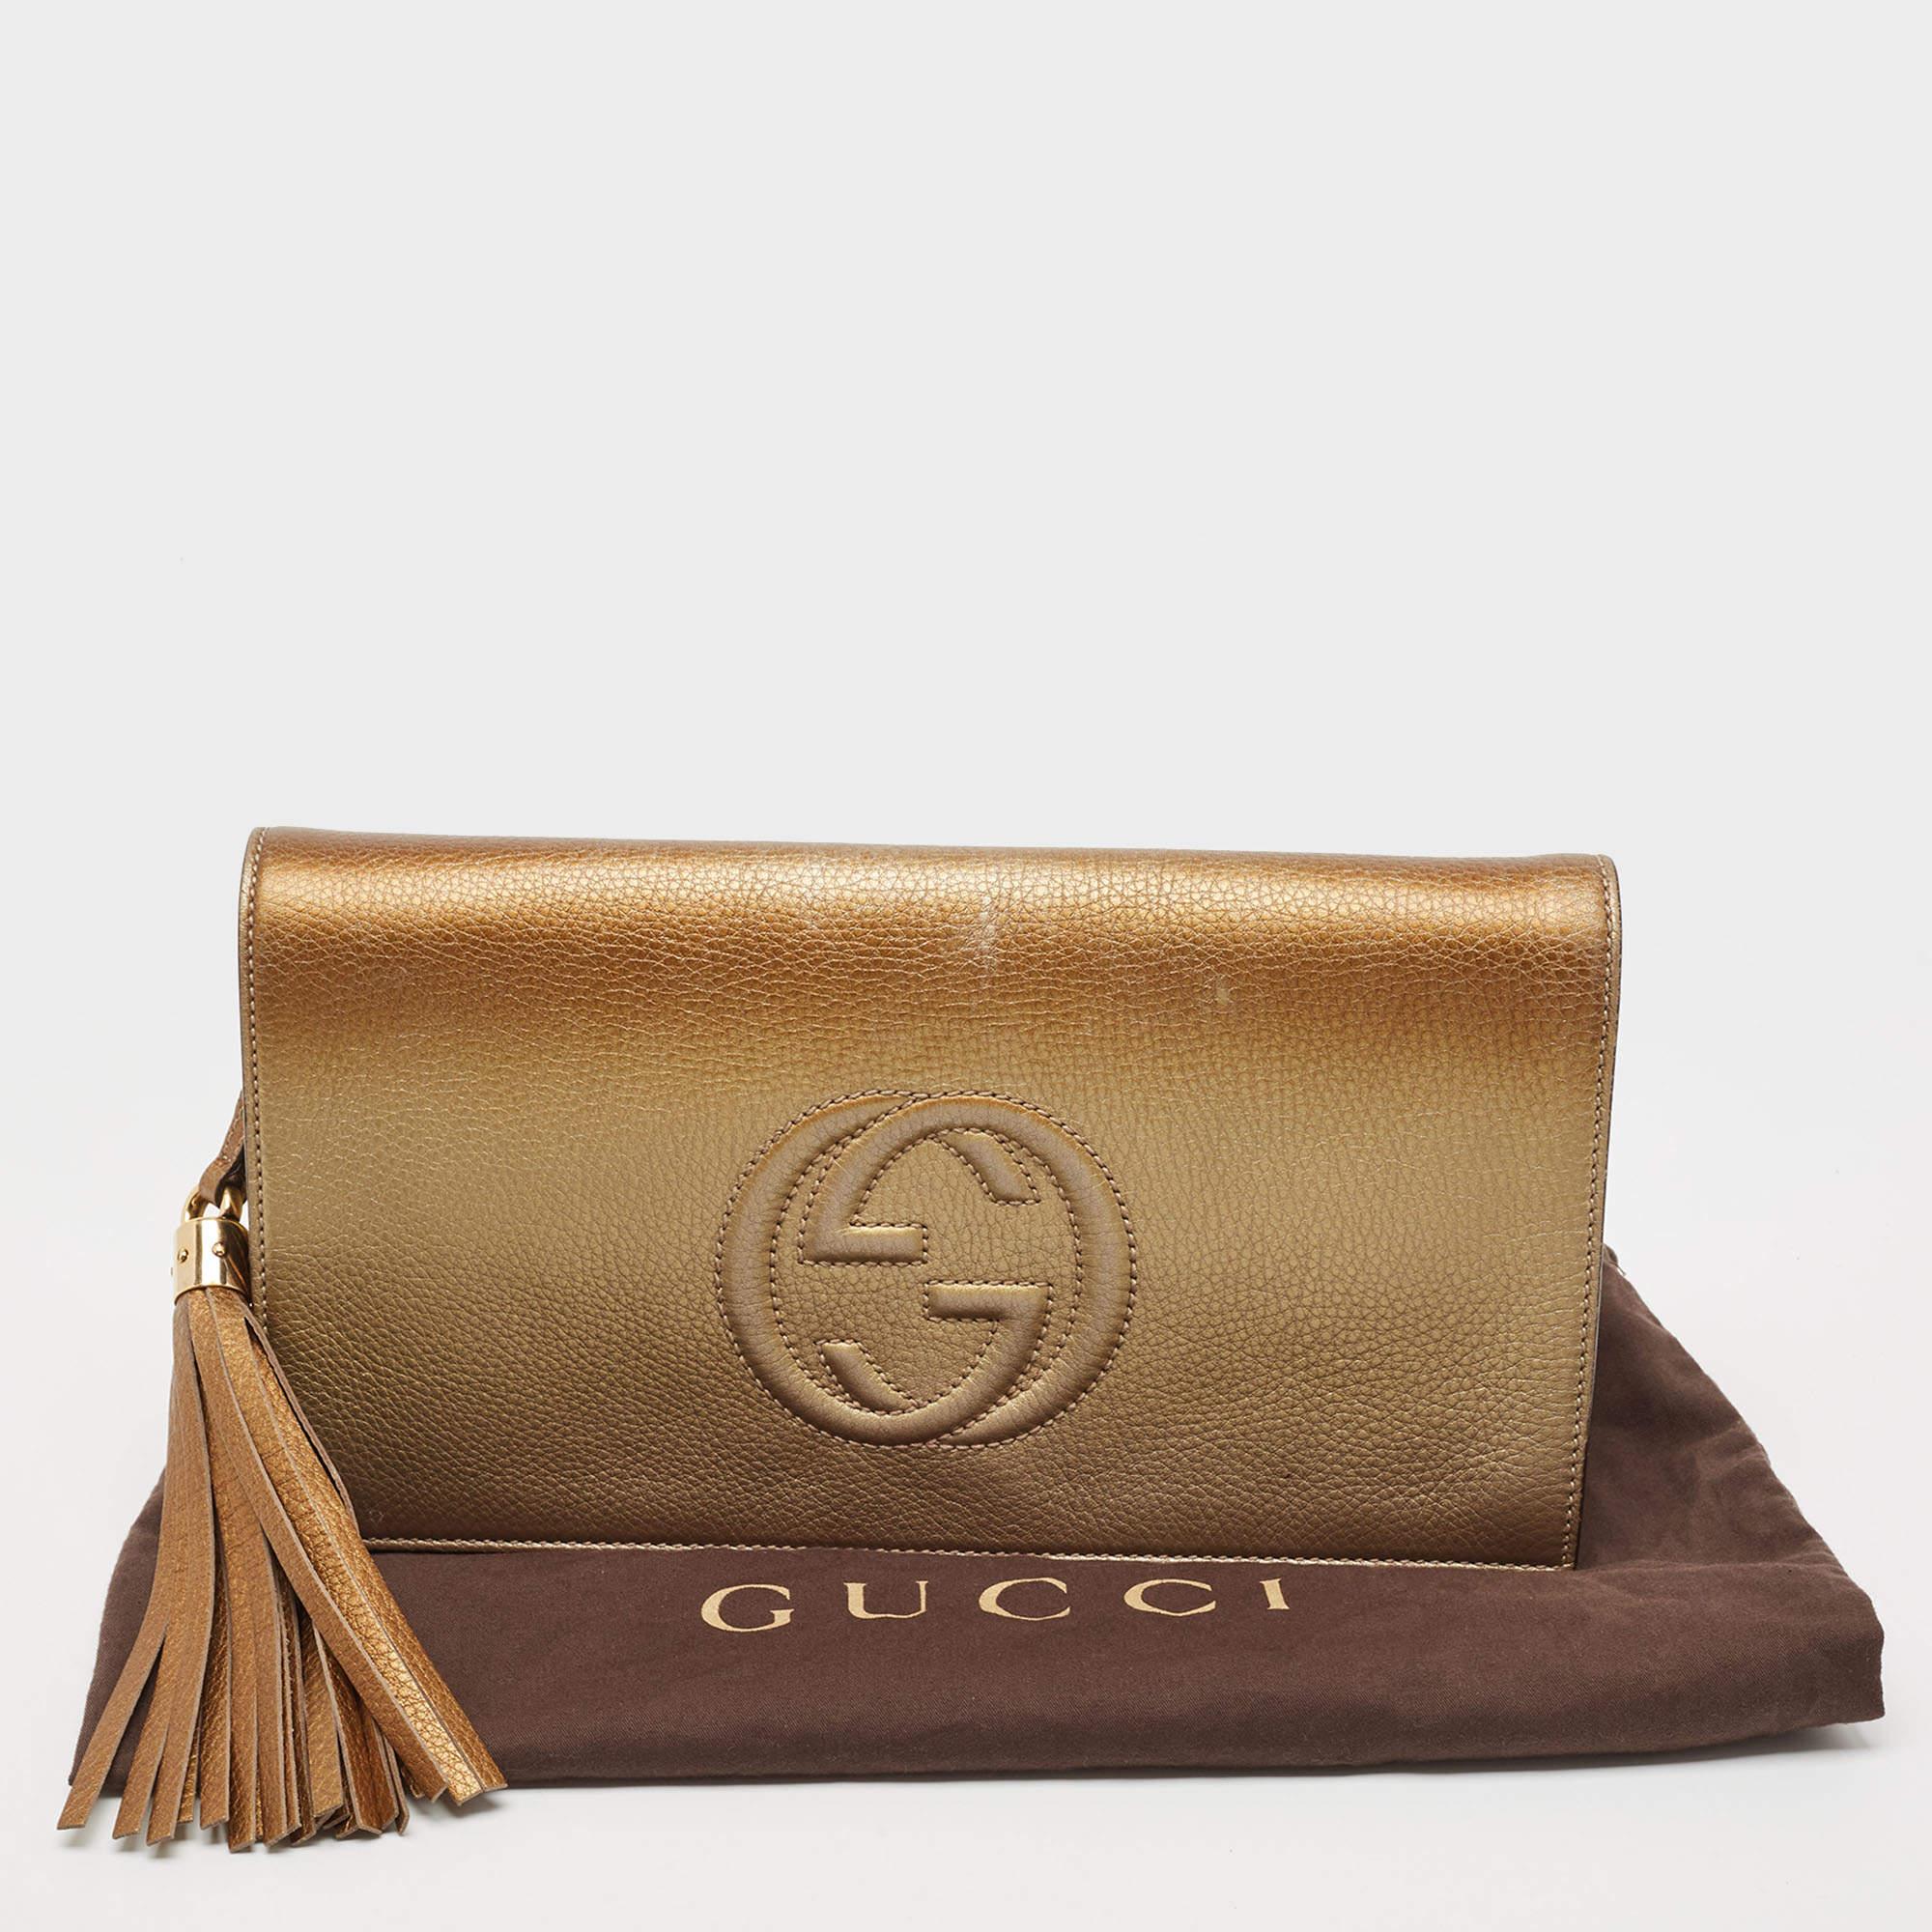 Gucci Gold Ombre Leather Soho Tassel Clutch 11